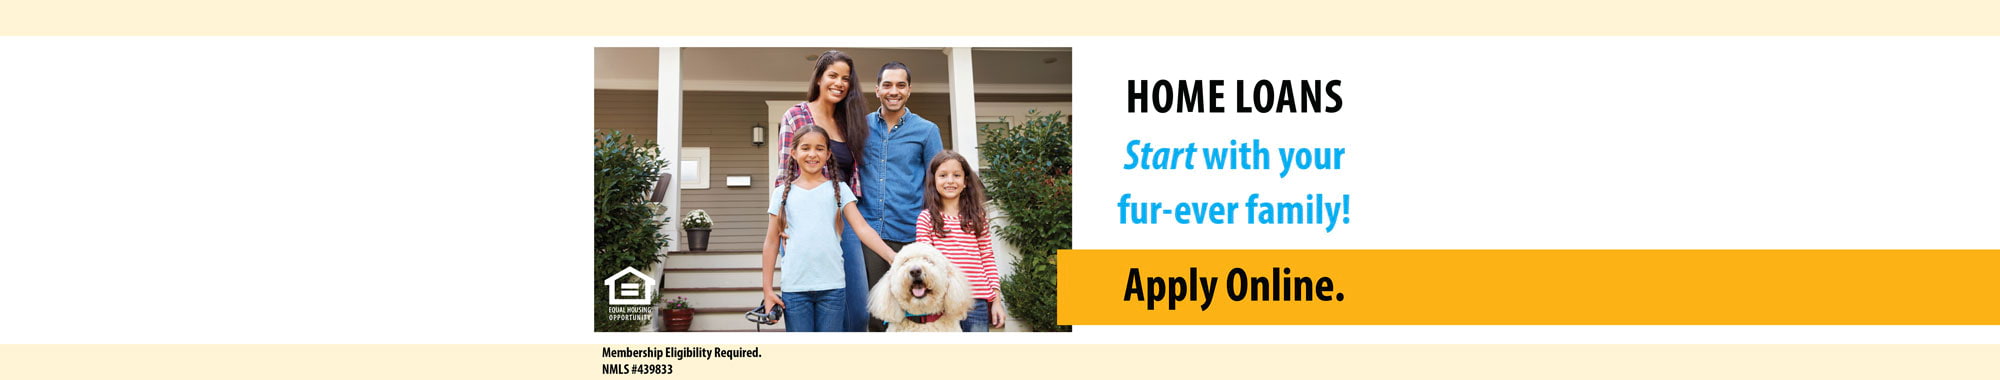 Family of four with dog standing in front of their home. HOME LOANS Start with your fur-ever family! Apply Online.